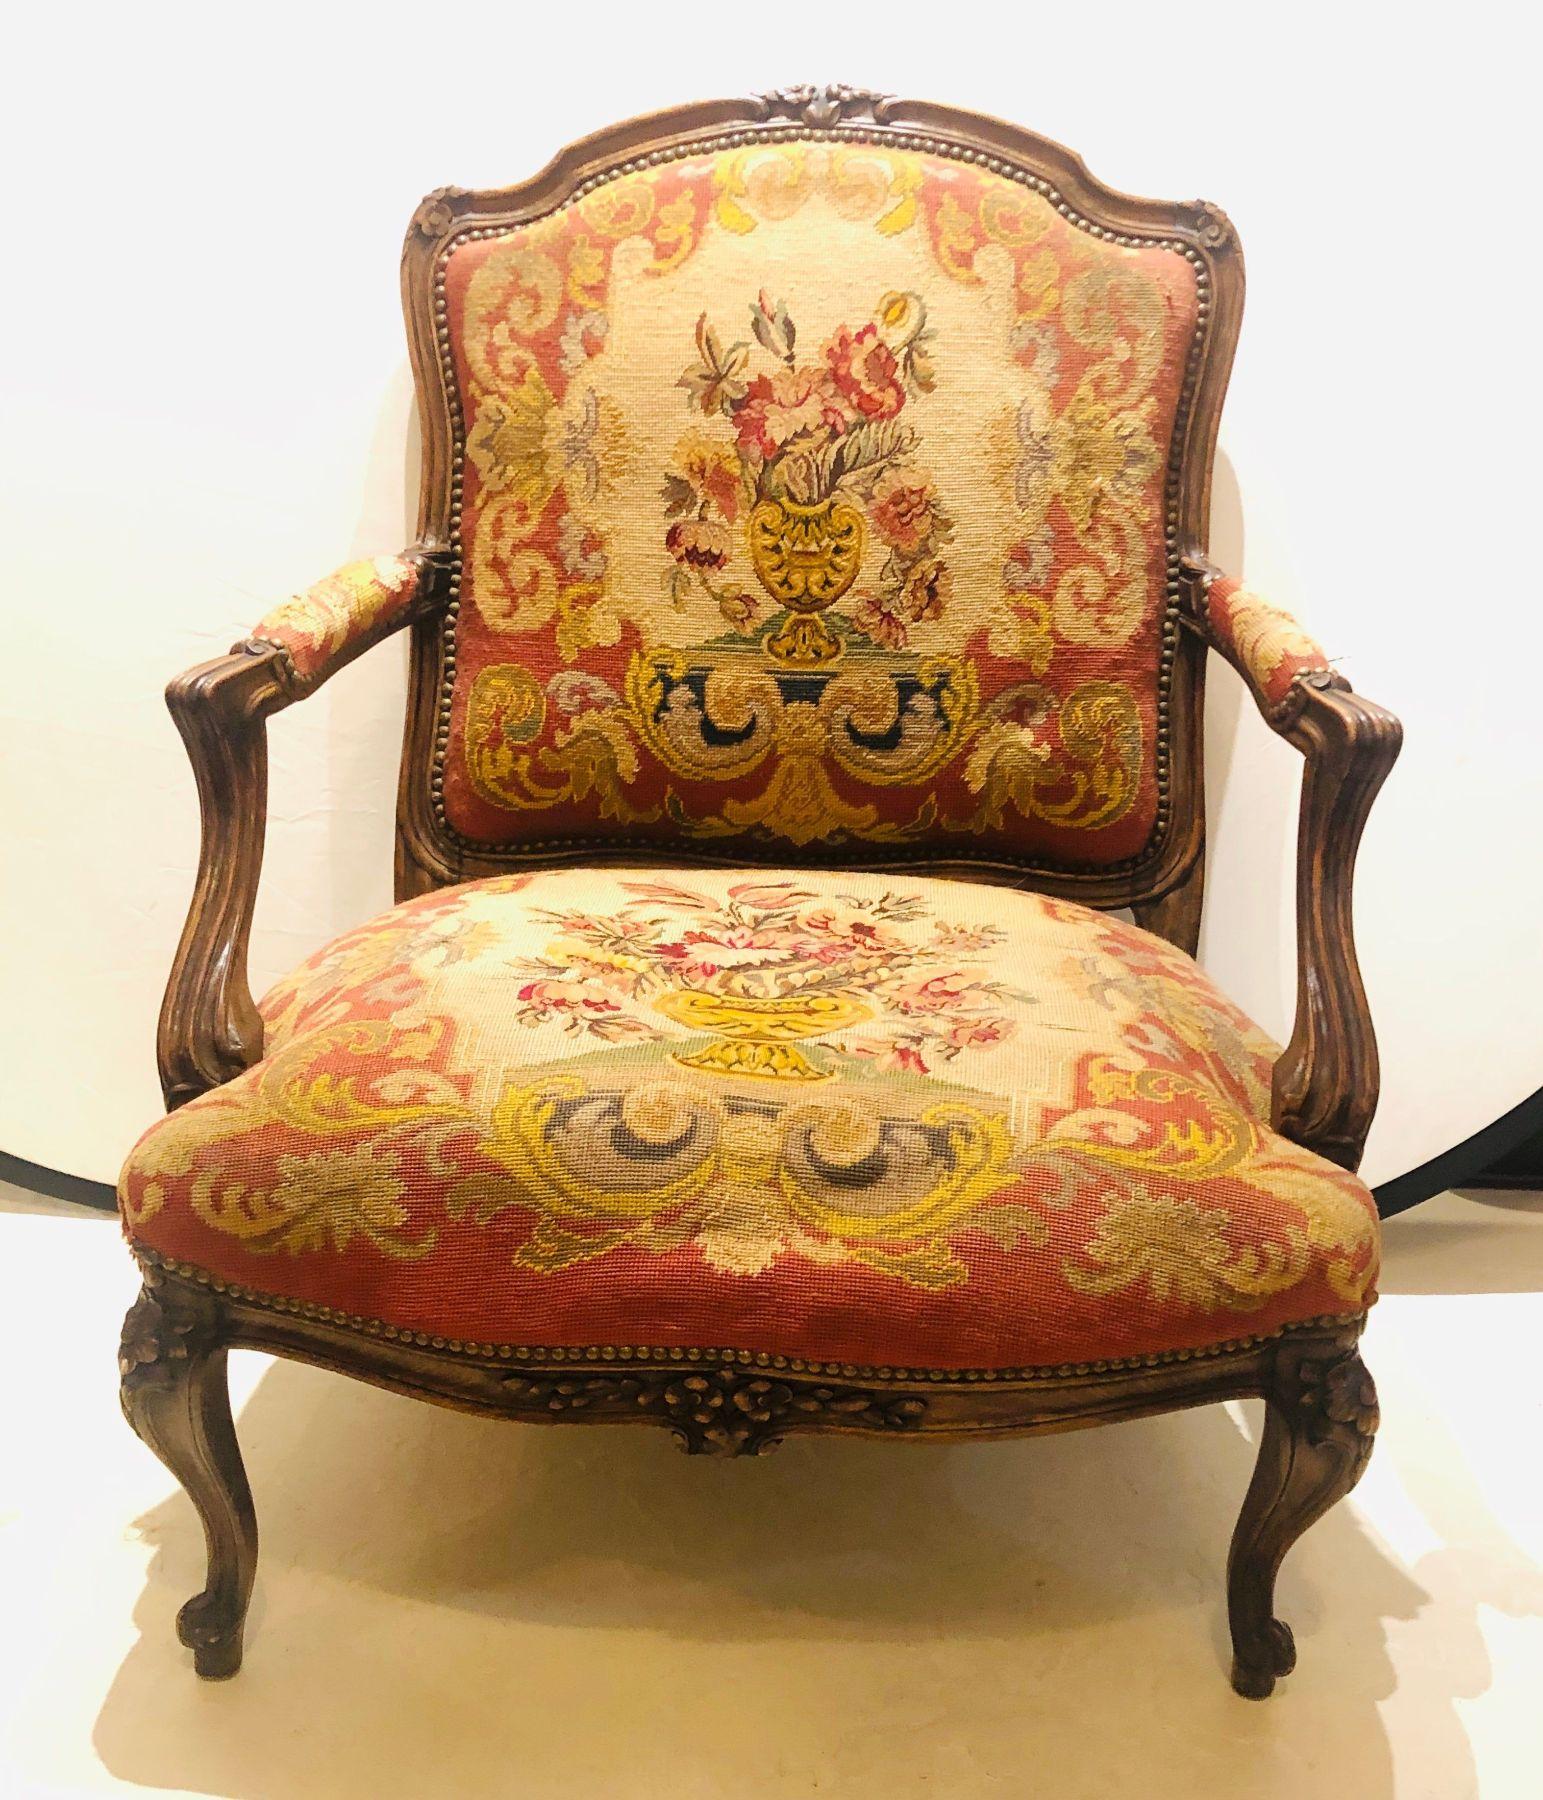 19th Century Louis XV Style Armchair Bergere Petite and Gros Point Upholstery In Fair Condition For Sale In Stamford, CT